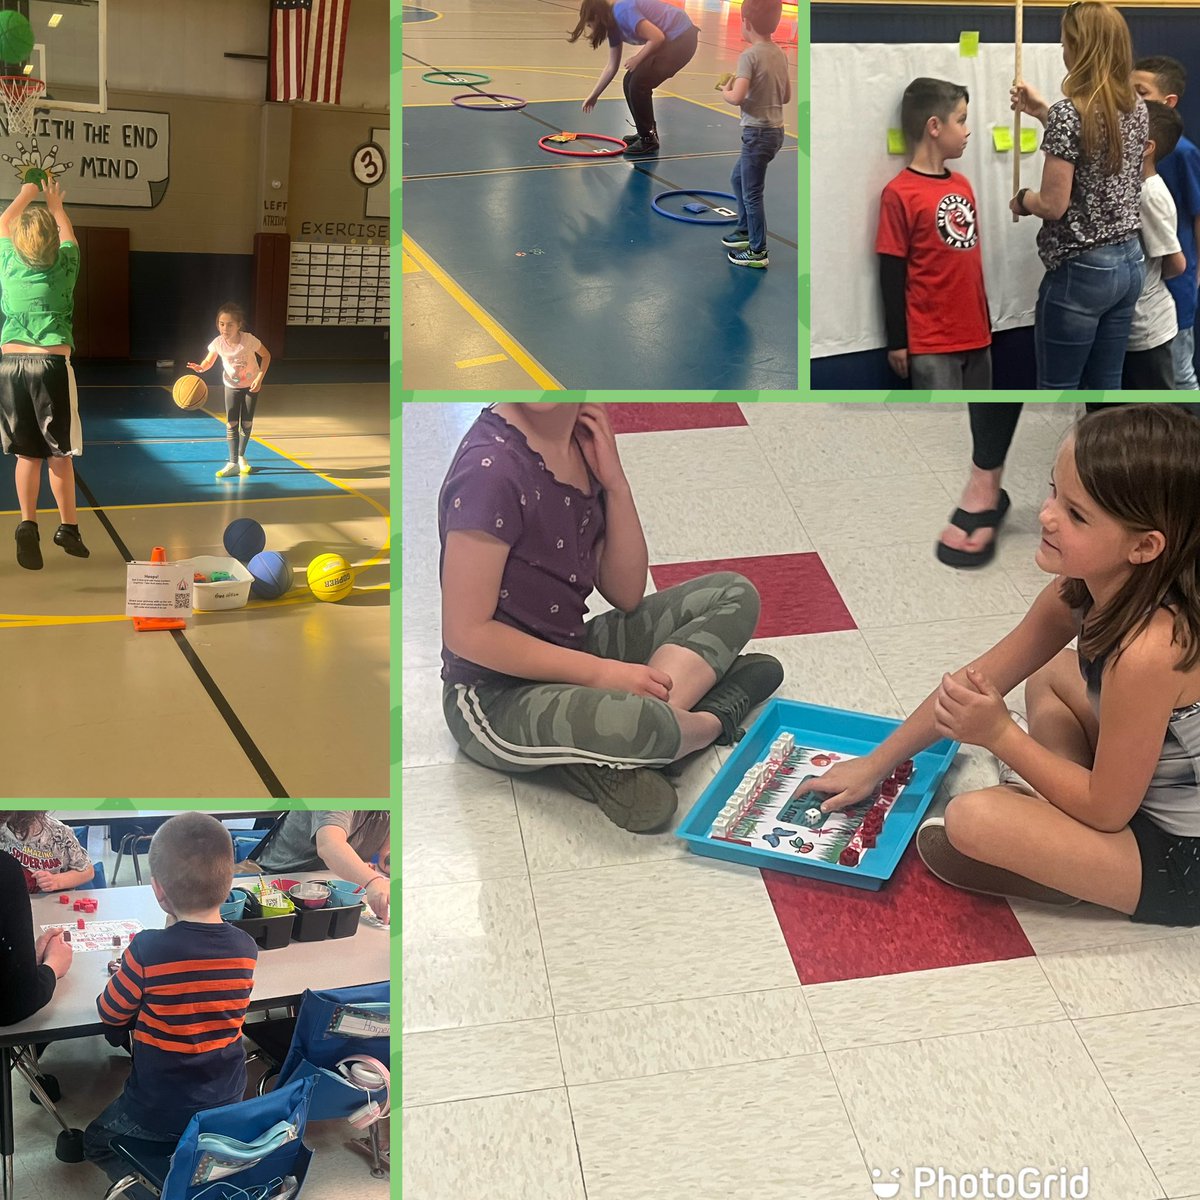 Math Carnival 🎡 at @RivertonElem was AMAZING! Families & educators came together for a FUN 🤩 night of math games and activities! Great work @KimGulledge @AmstiUAH @NewsMCS